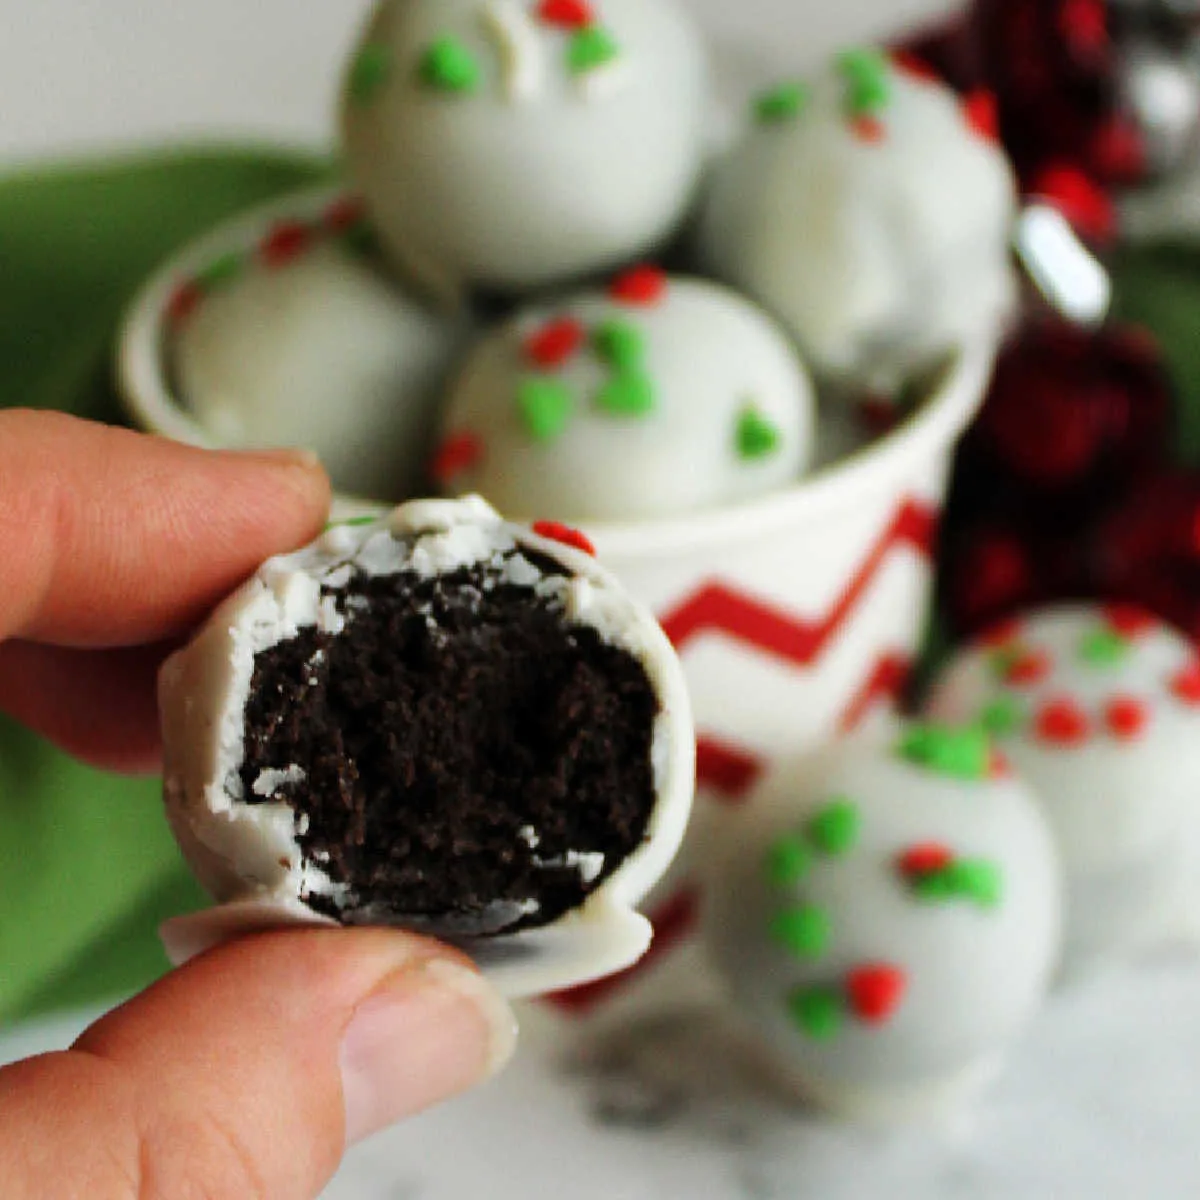 Hand holding white chocolate coated oreo truffle showing smooth center of oreo and condensed milk mixture.